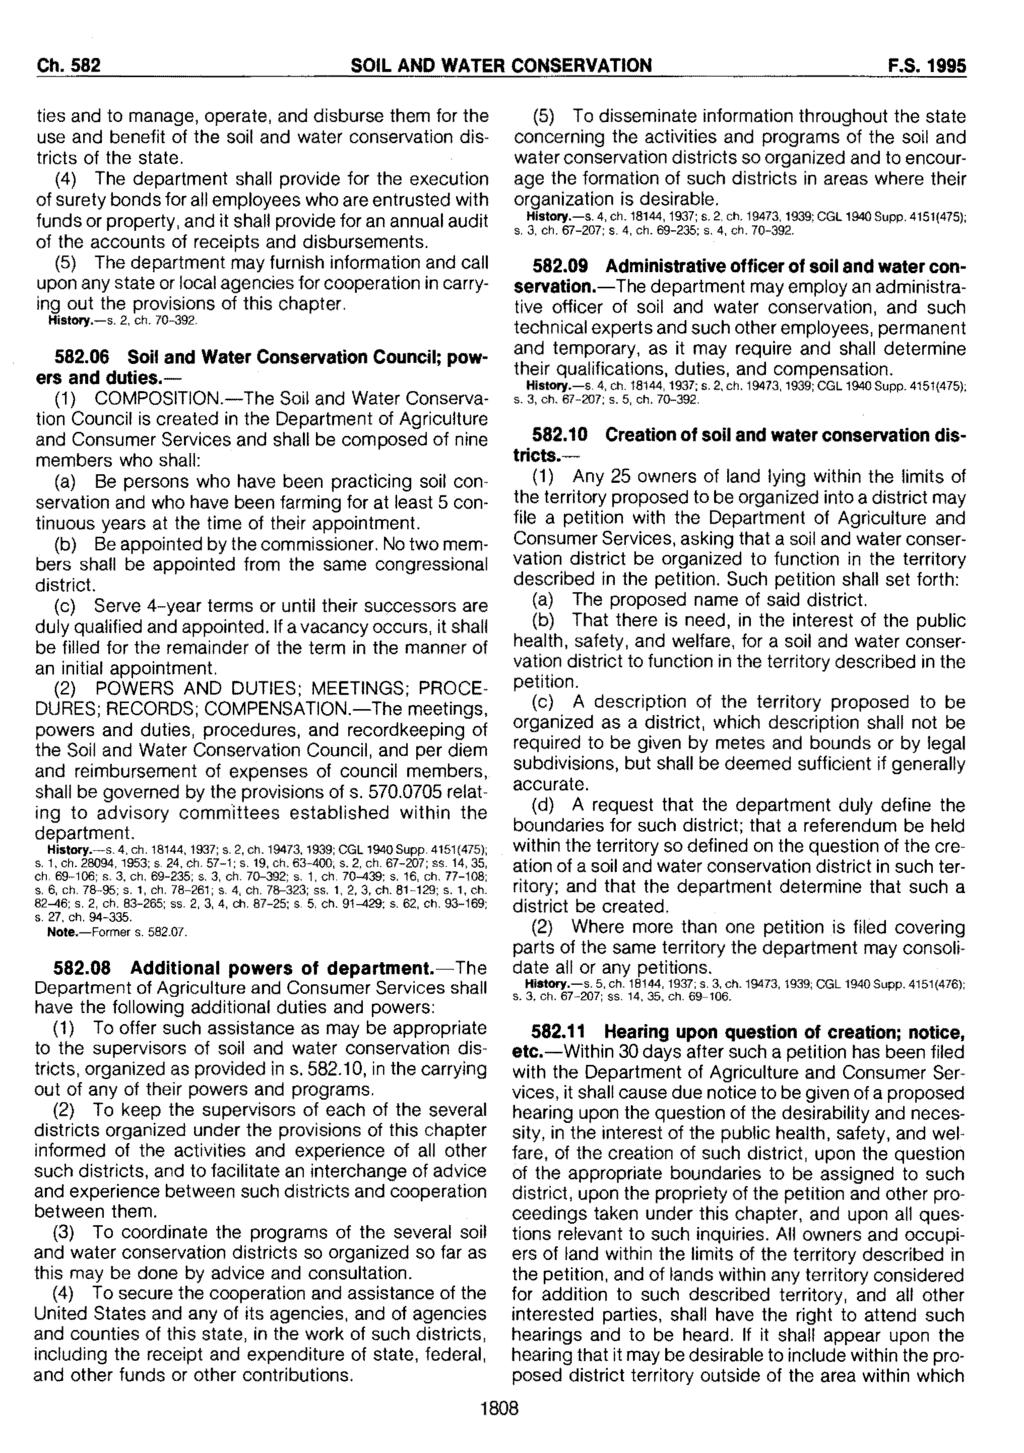 Ch.582 SOIL AND WATER CONSERVATION F.S. 1995 ties and to manage, operate, and disburse them for the use and benefit of the soil and water conservation districts of the state.